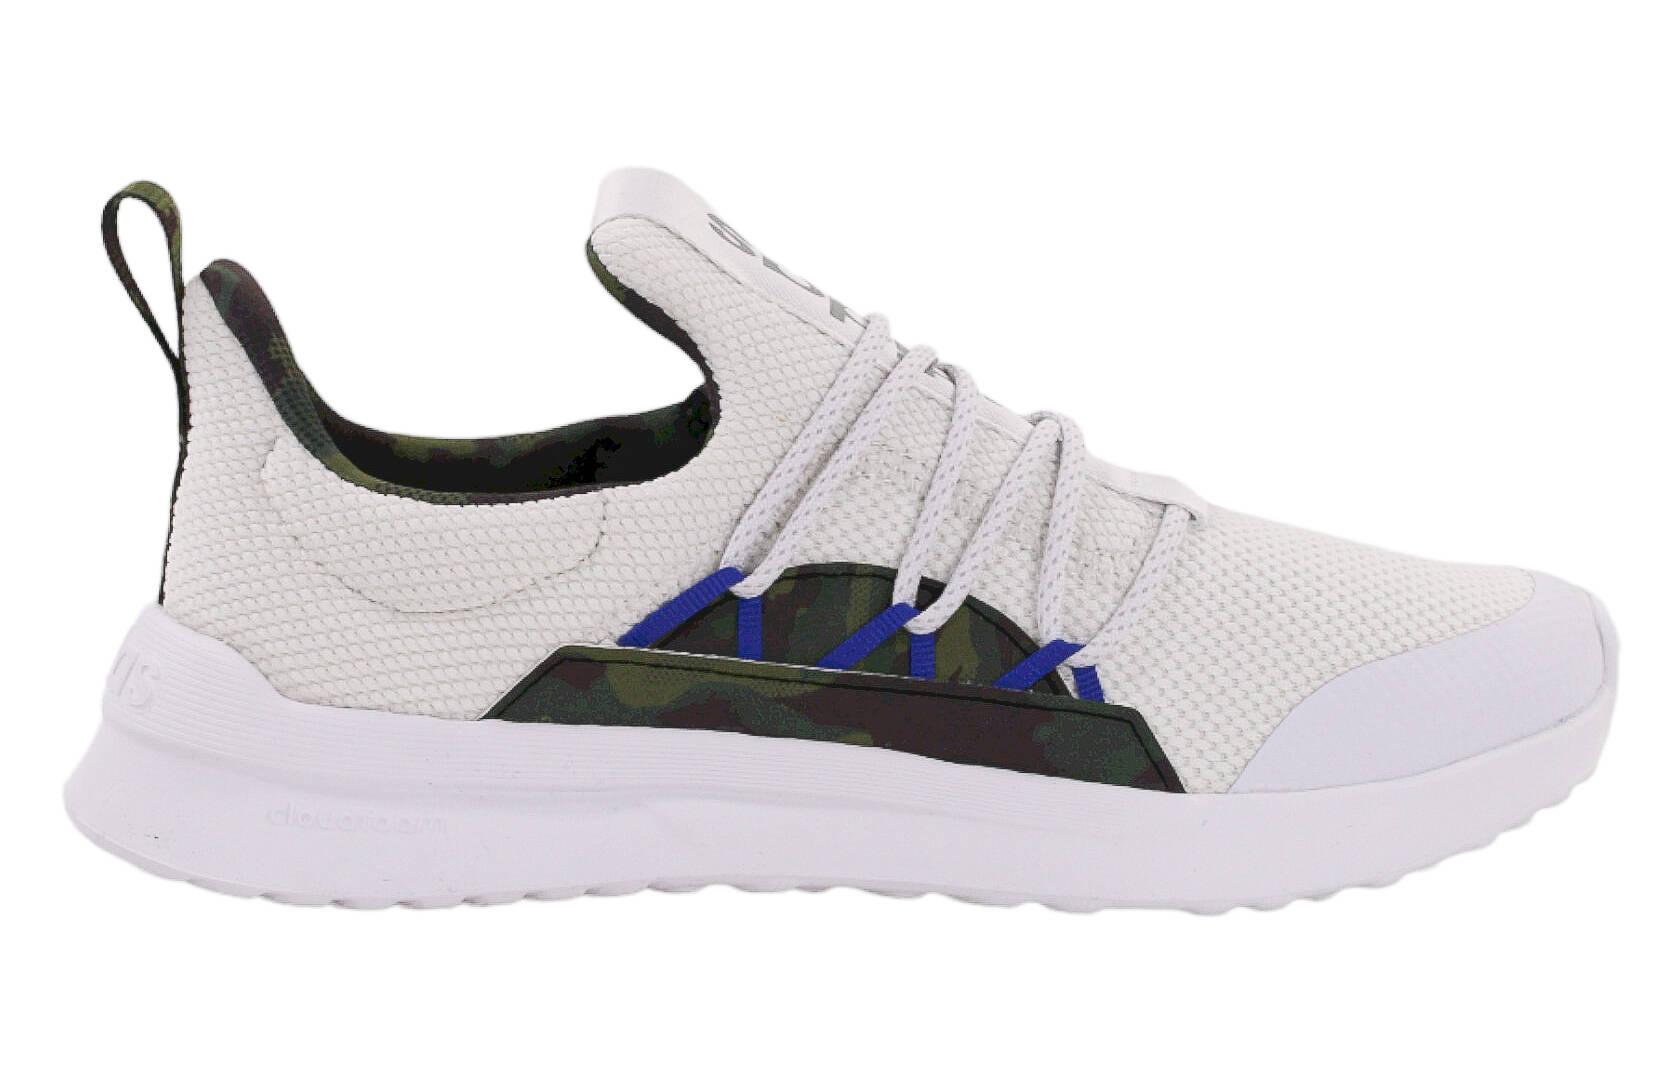 Adidas LITE RACER ADAPT 5 youth shoes. GW7156